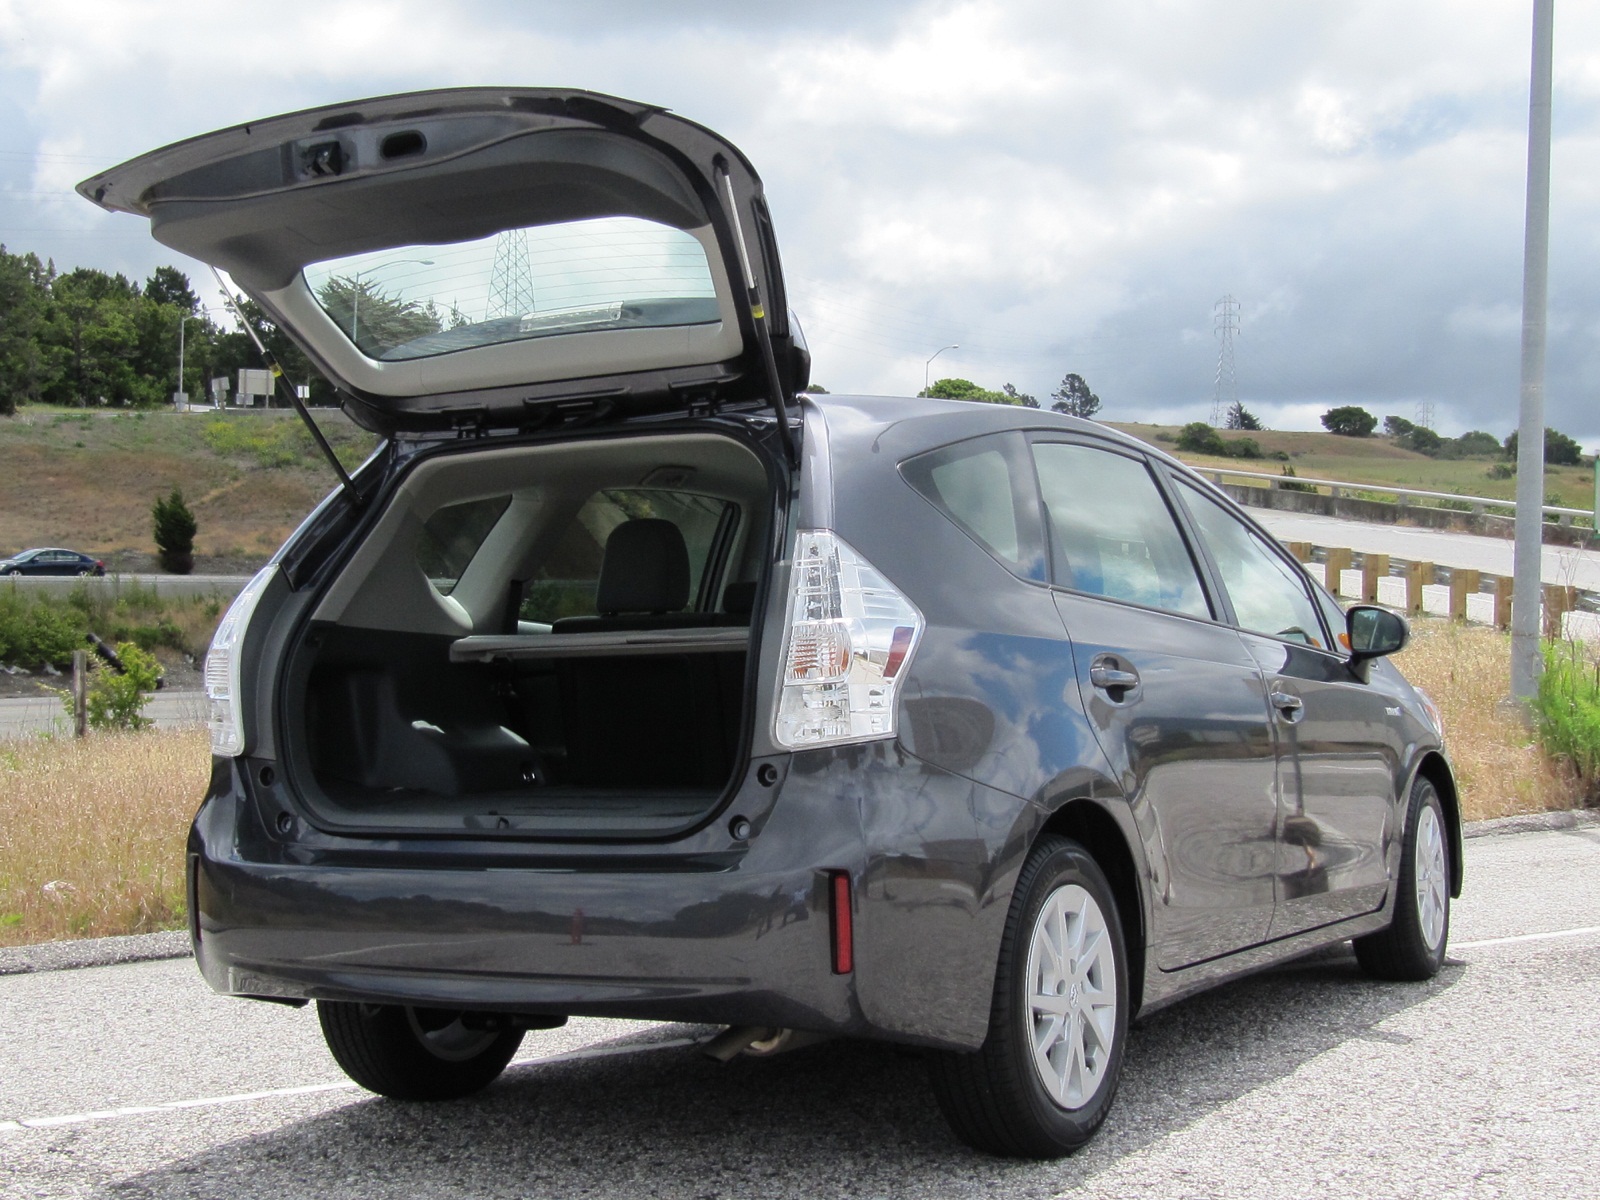 2012 Toyota Prius V Station Wagon: First Drive Review